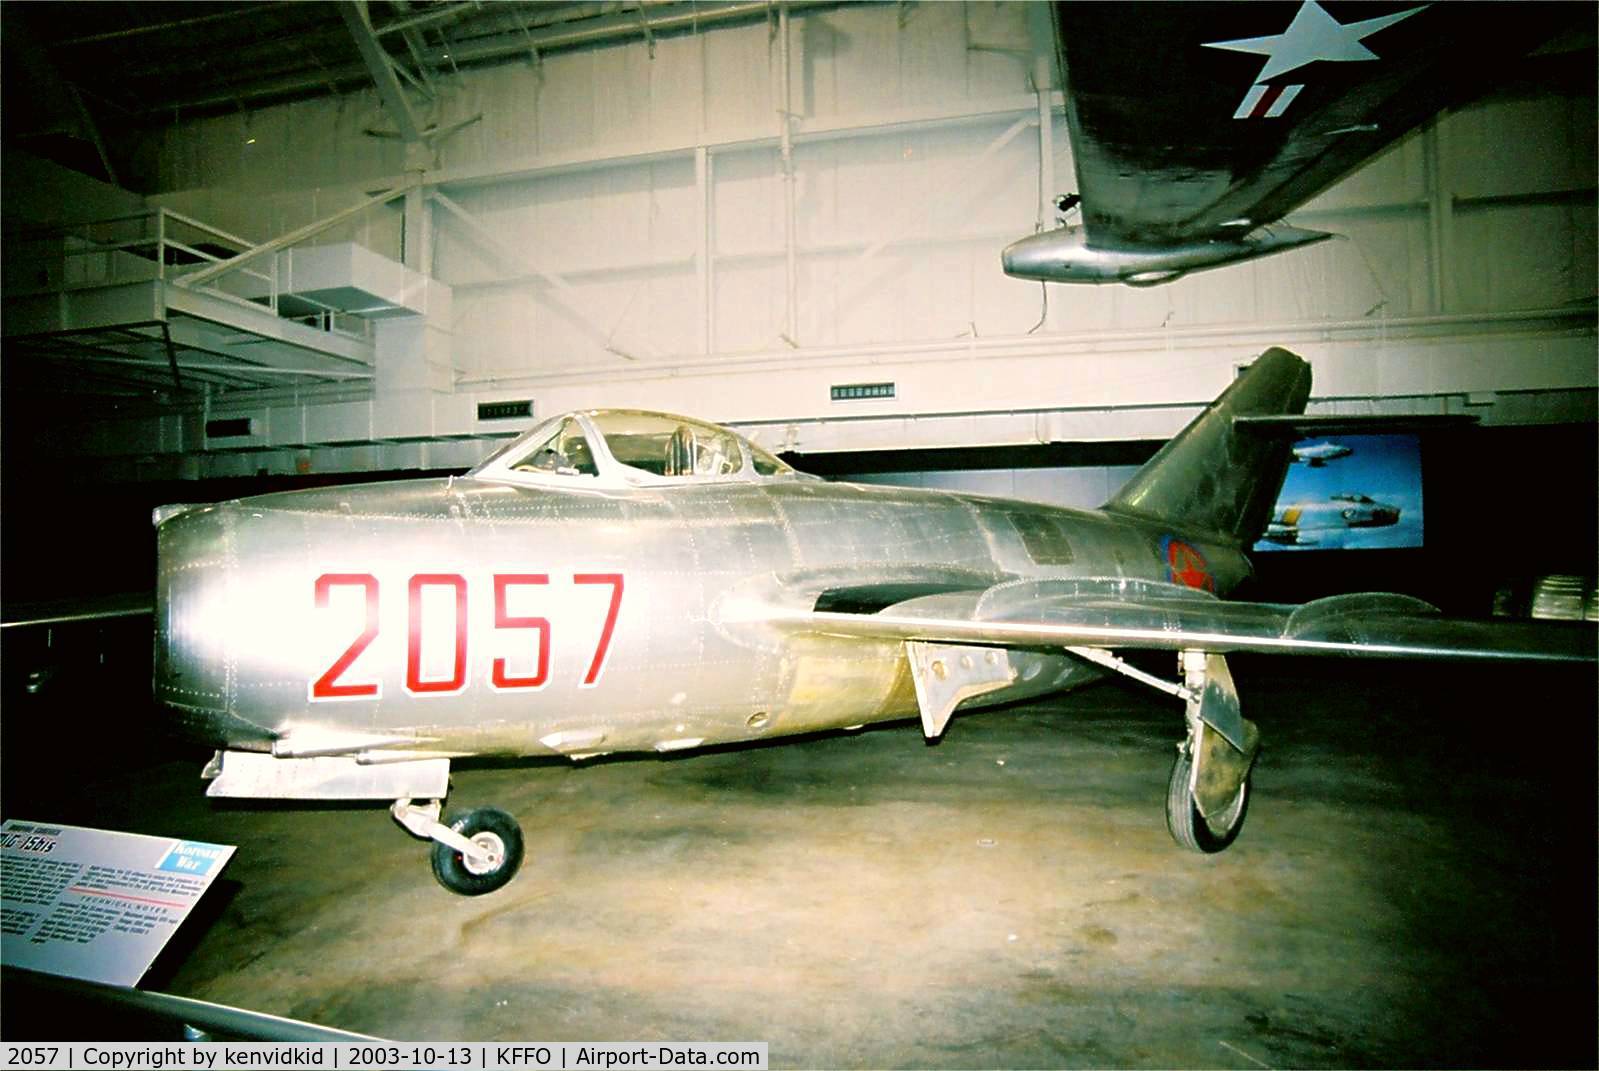 2057, Mikoyan-Gurevich MiG-15bis C/N 2015357, At the Museum of the United States Air Force Dayton Ohio.